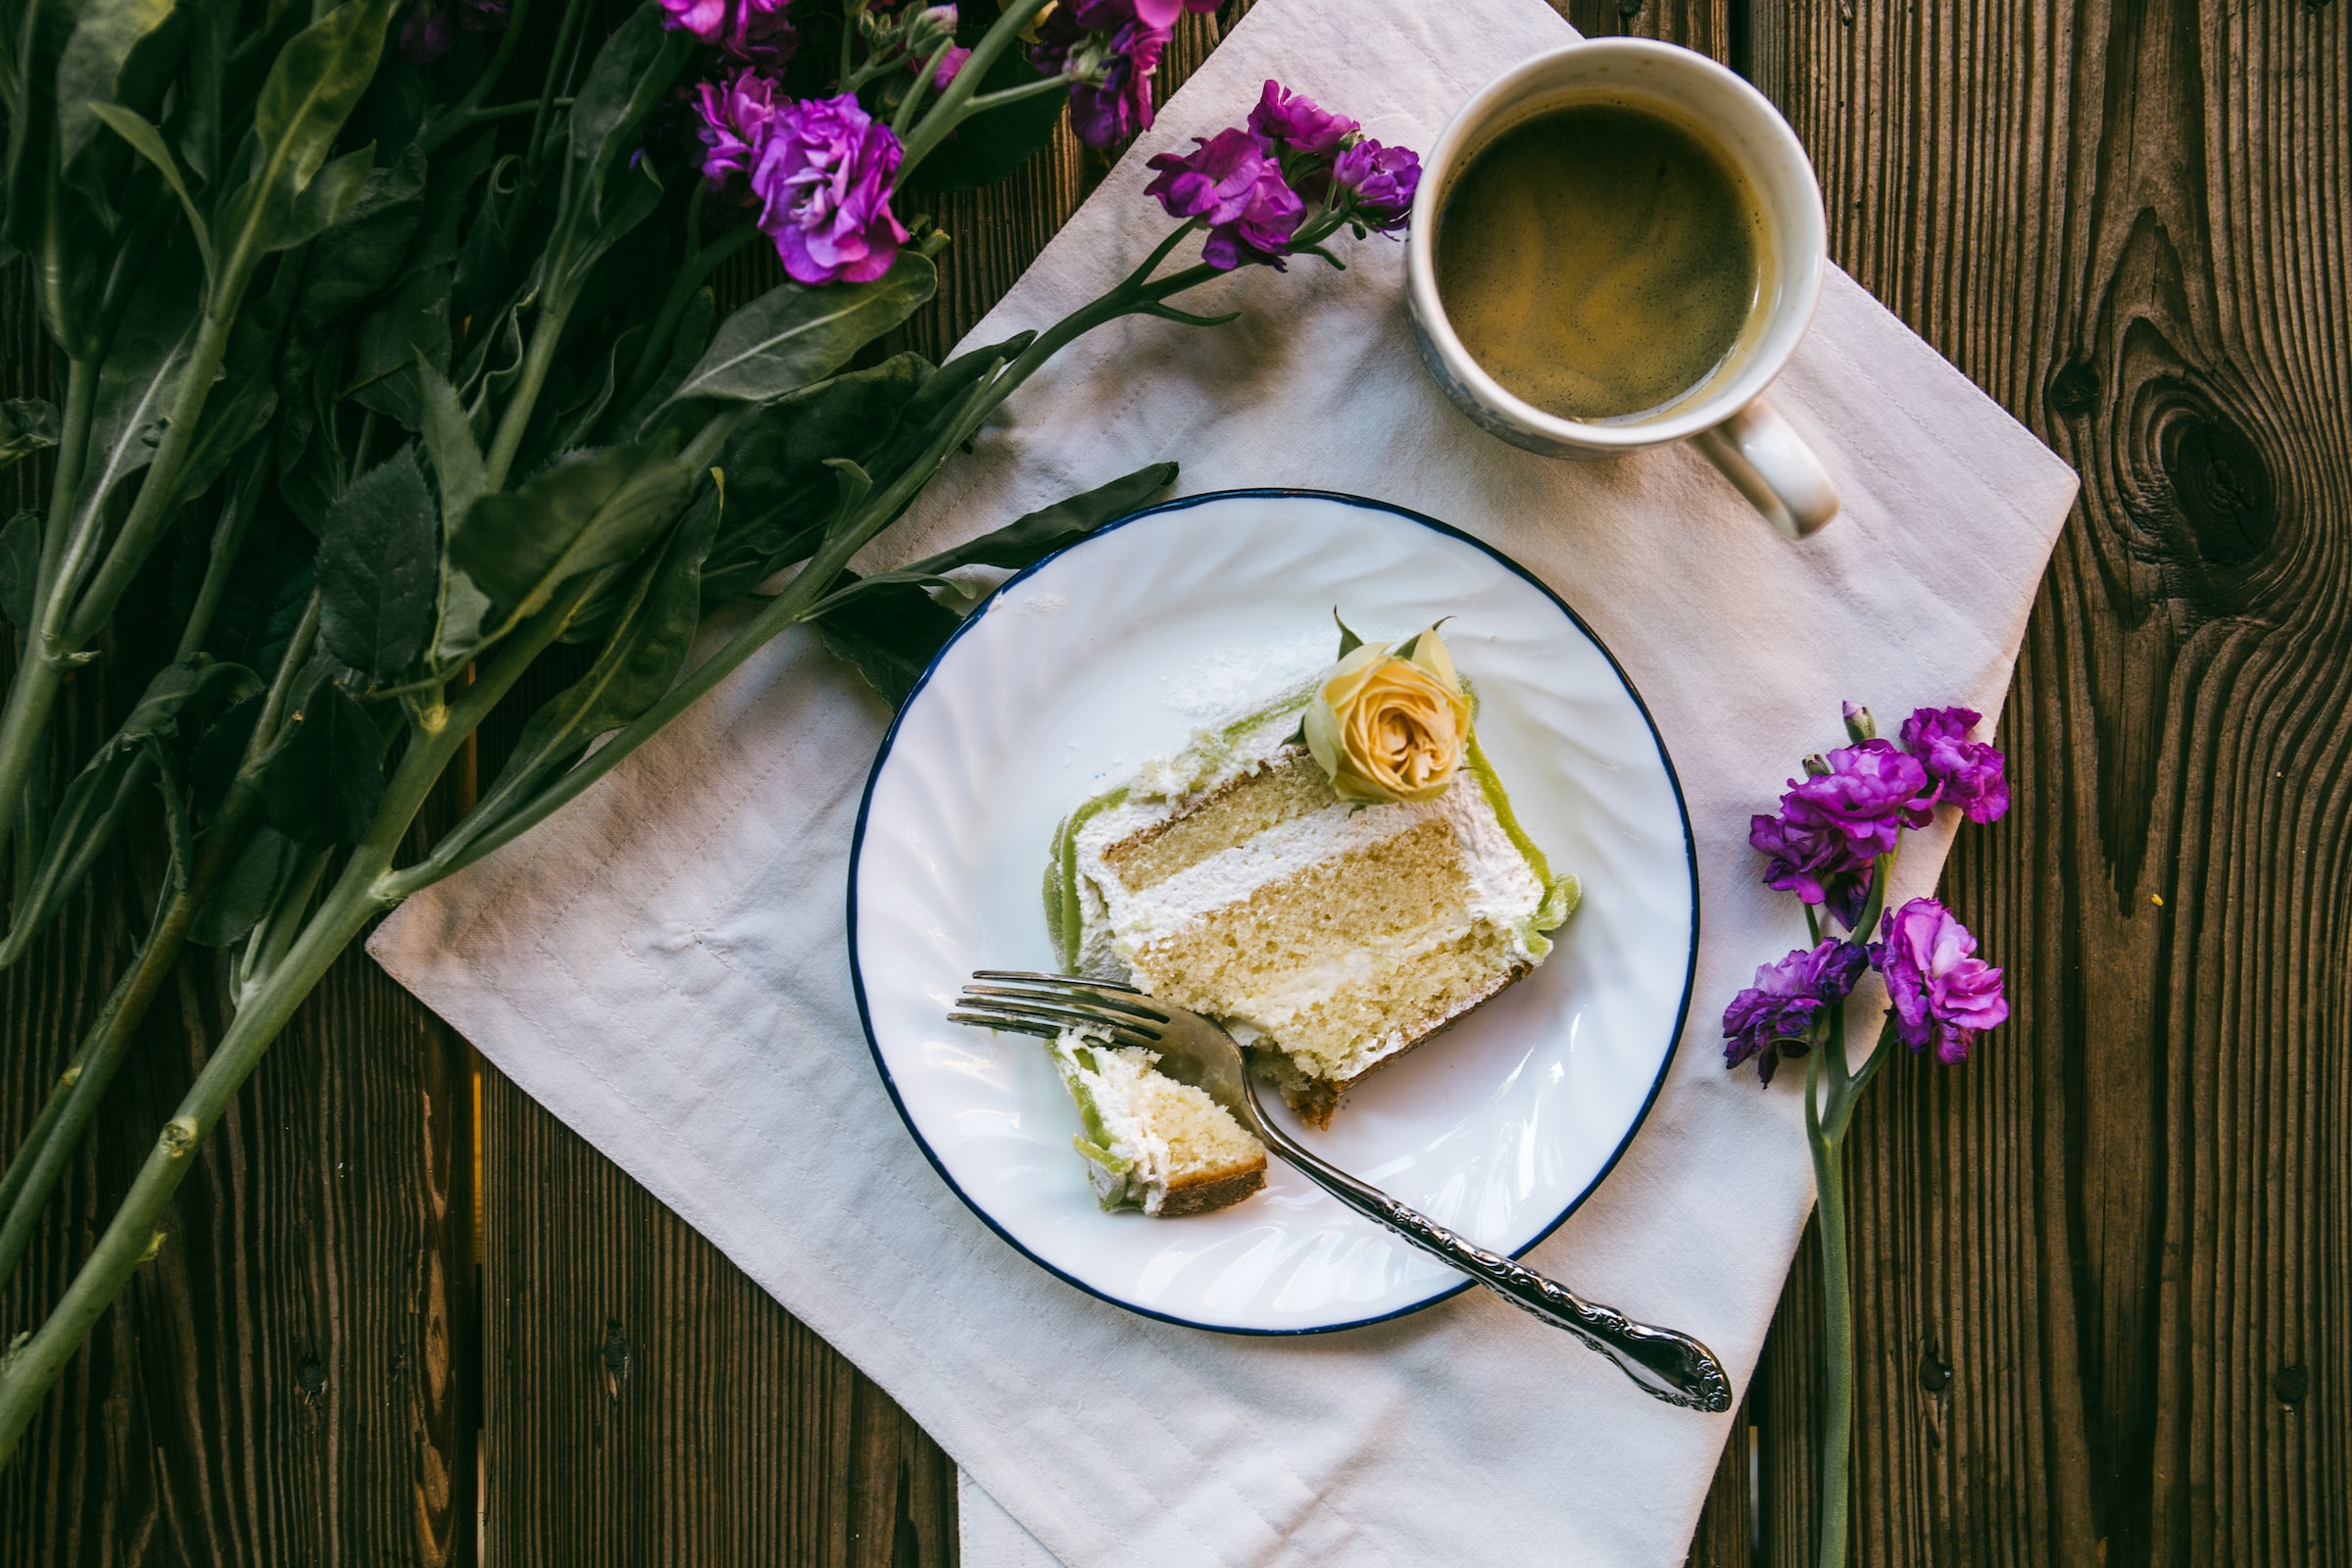 A creamy piece of cake is lying on a white plate. The plate is on a table, on the table there are also purple flowers and a cup with coffee.